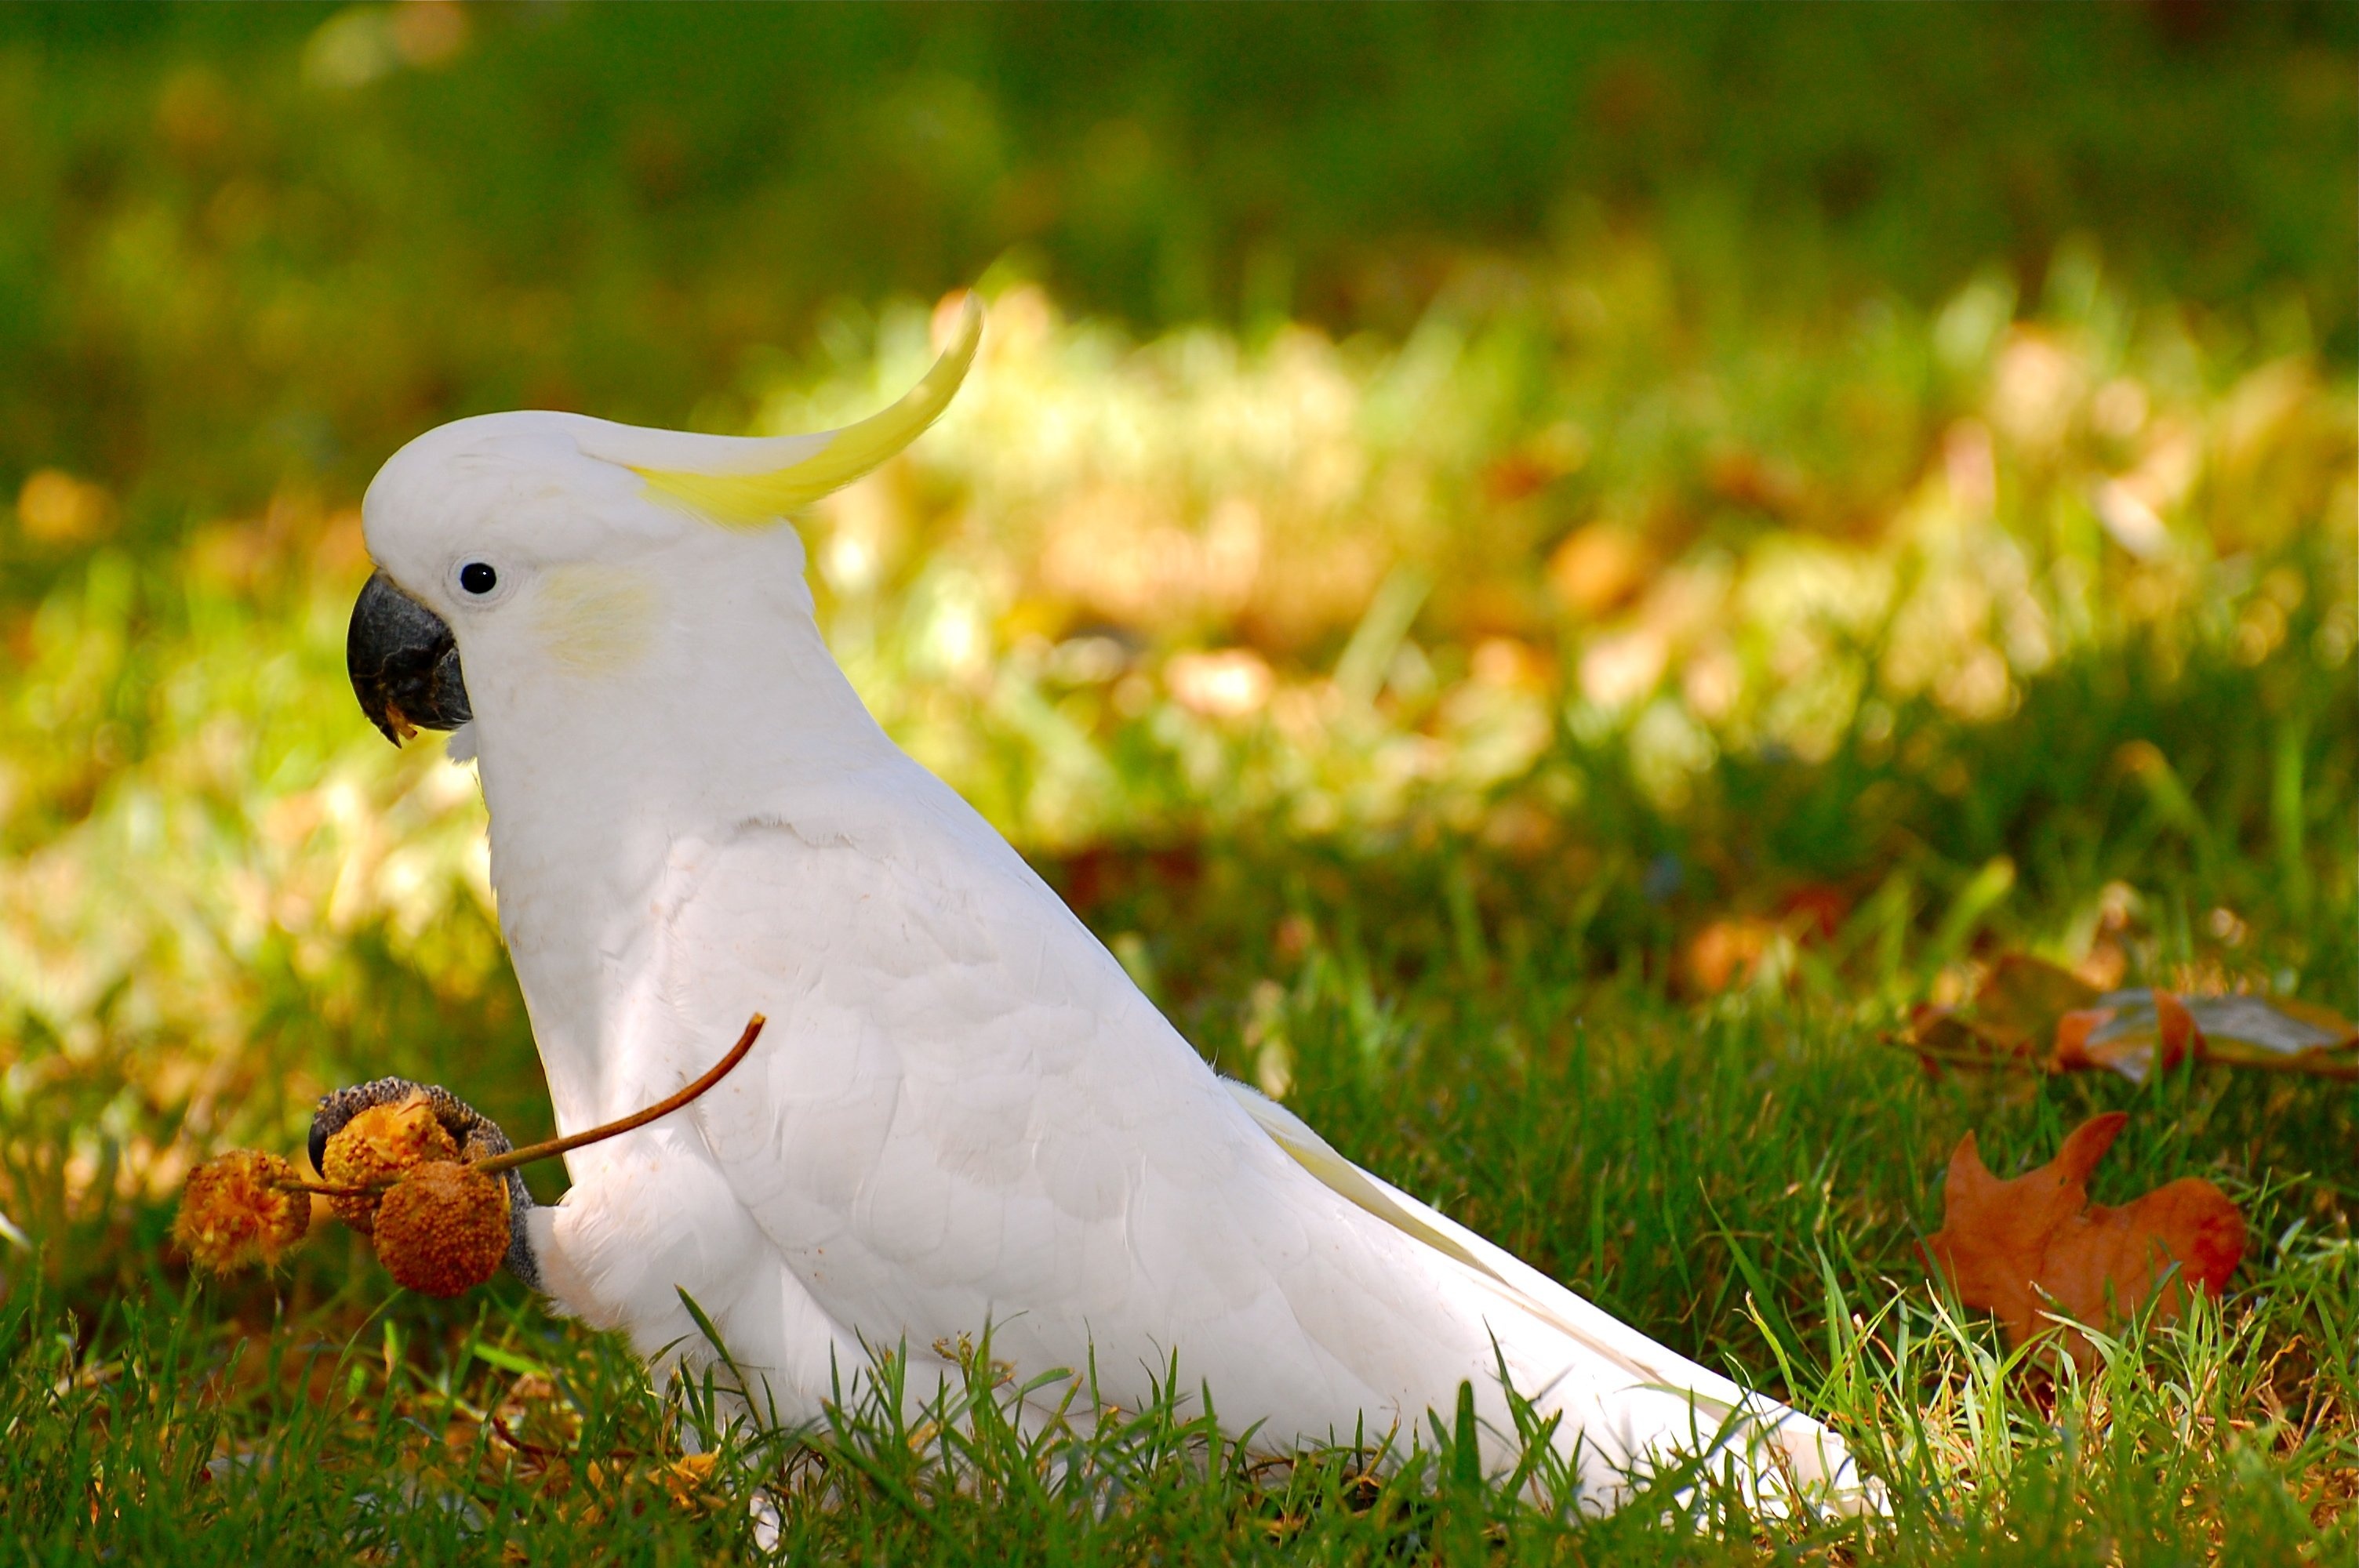 Cockatoo: Yellow Crested Birdie With Acorns And Leaves In Fall. 3010x2000 HD Wallpaper.